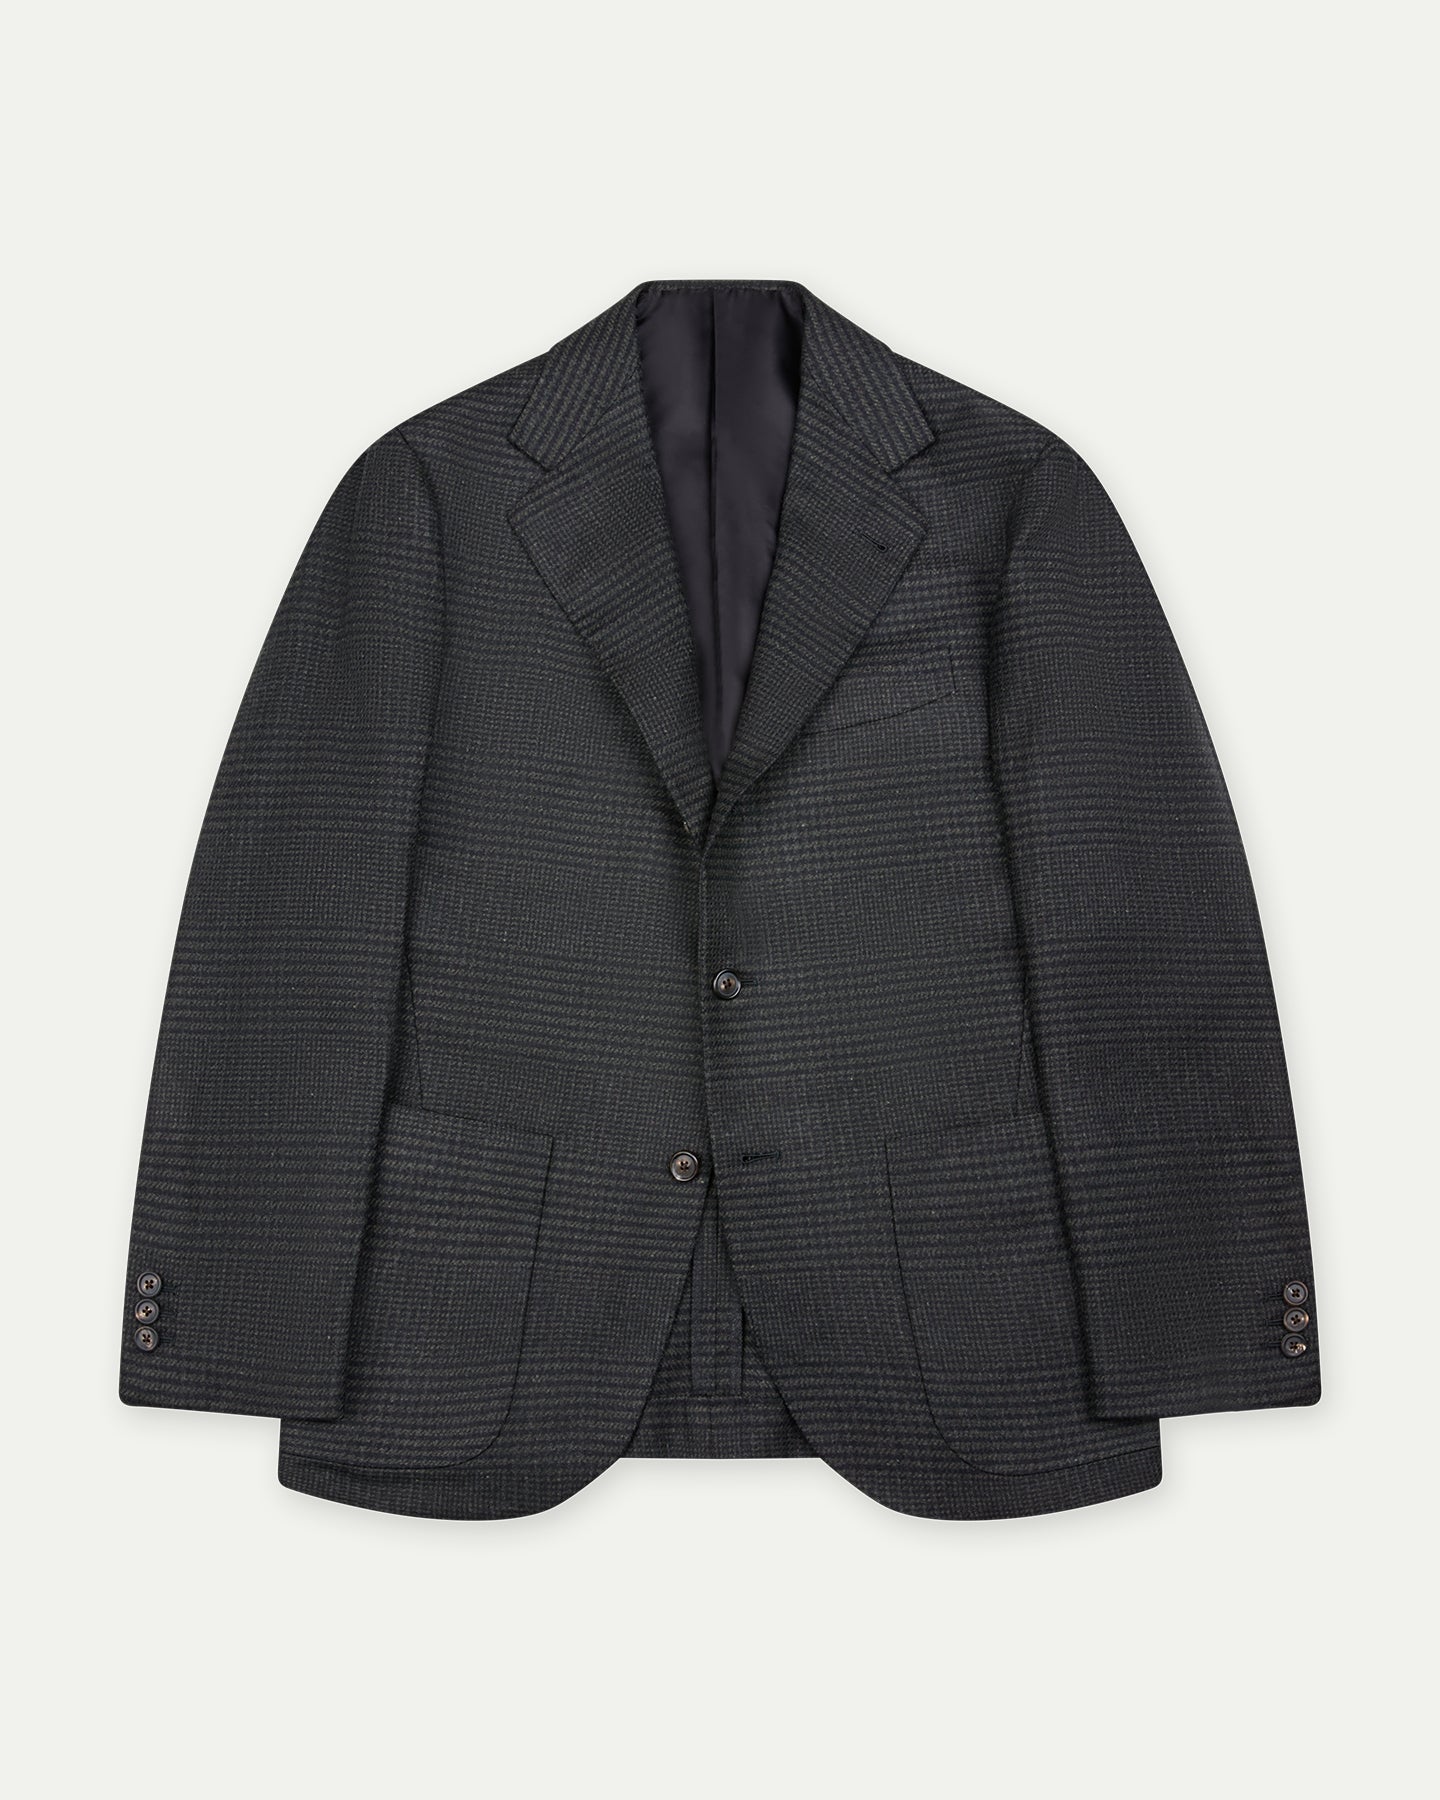 Made-To-Order Sport Coat Dark Grey Prince Of Wales